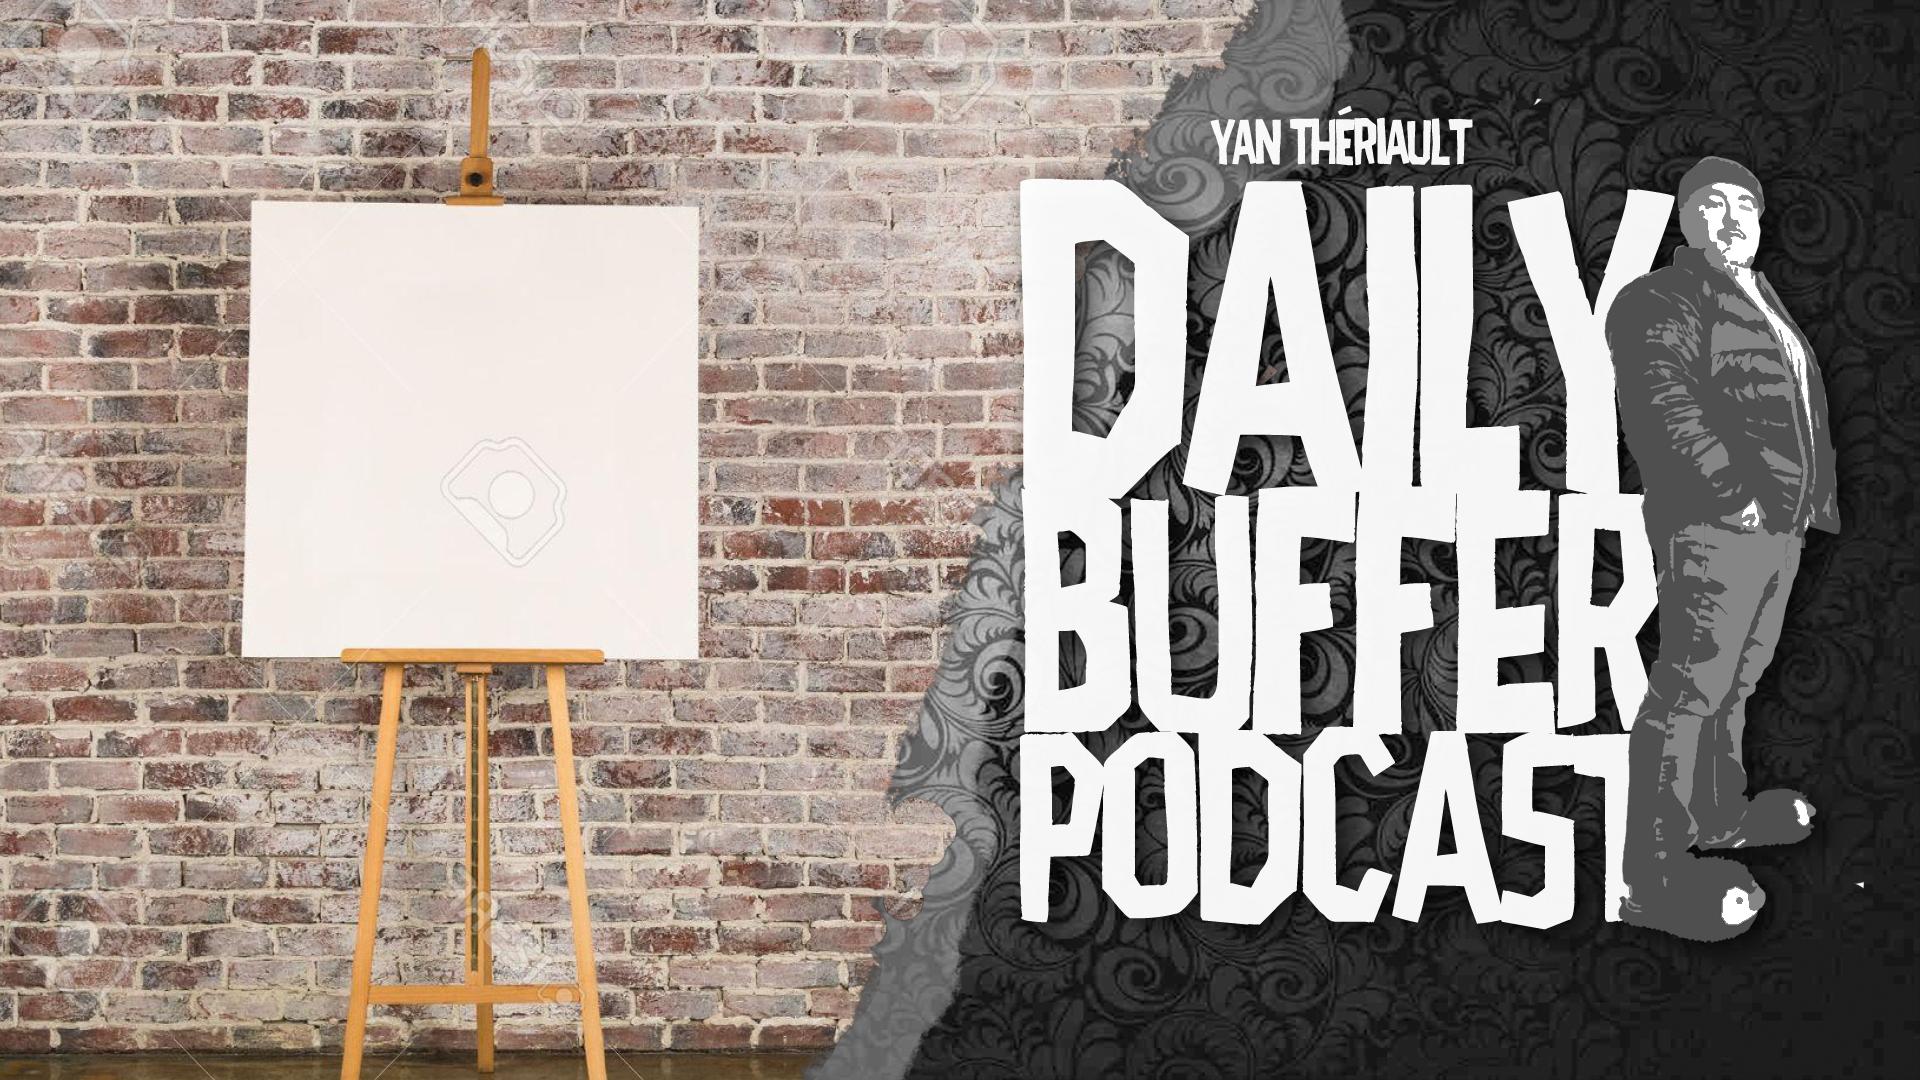 Le Daily Buffer Podcast - 2019 05 06 - Projet 1000 White Canvas